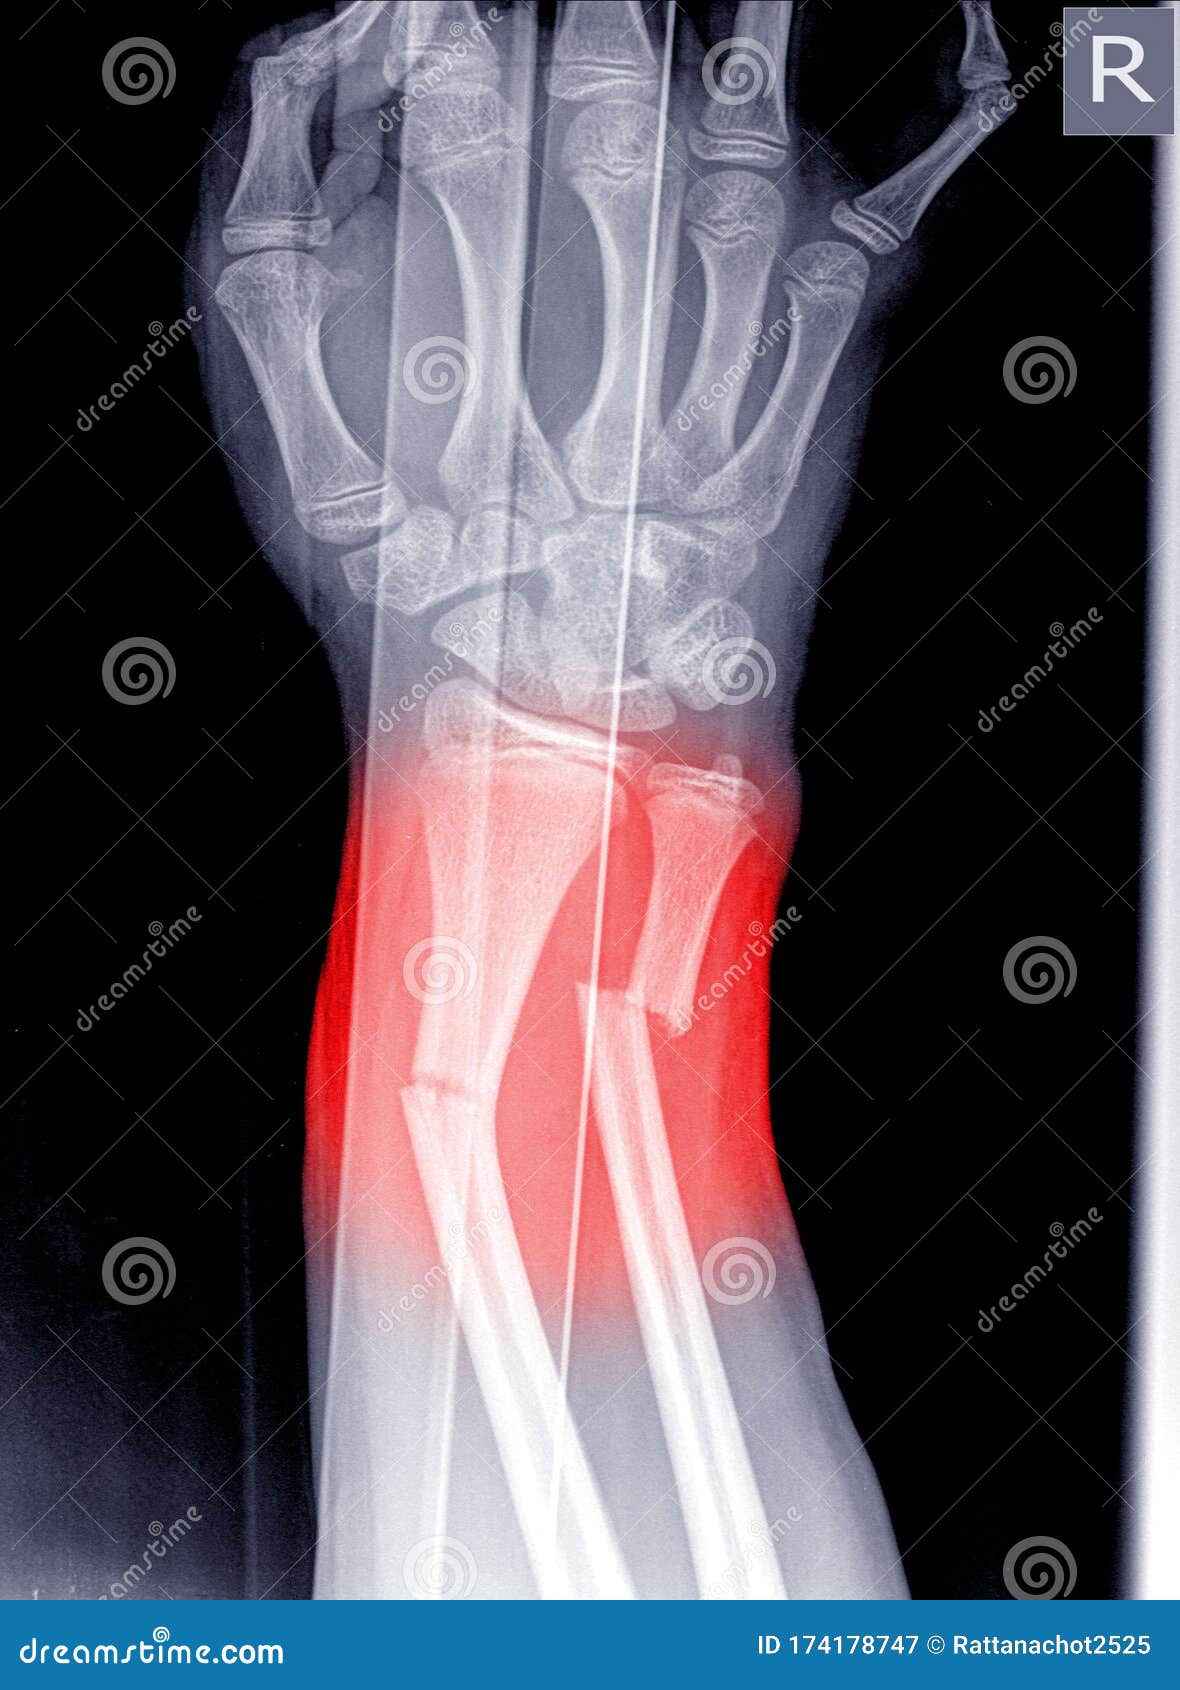 x-ray image of wrist joint, shows fracture of the distal radius and ulna on color mark